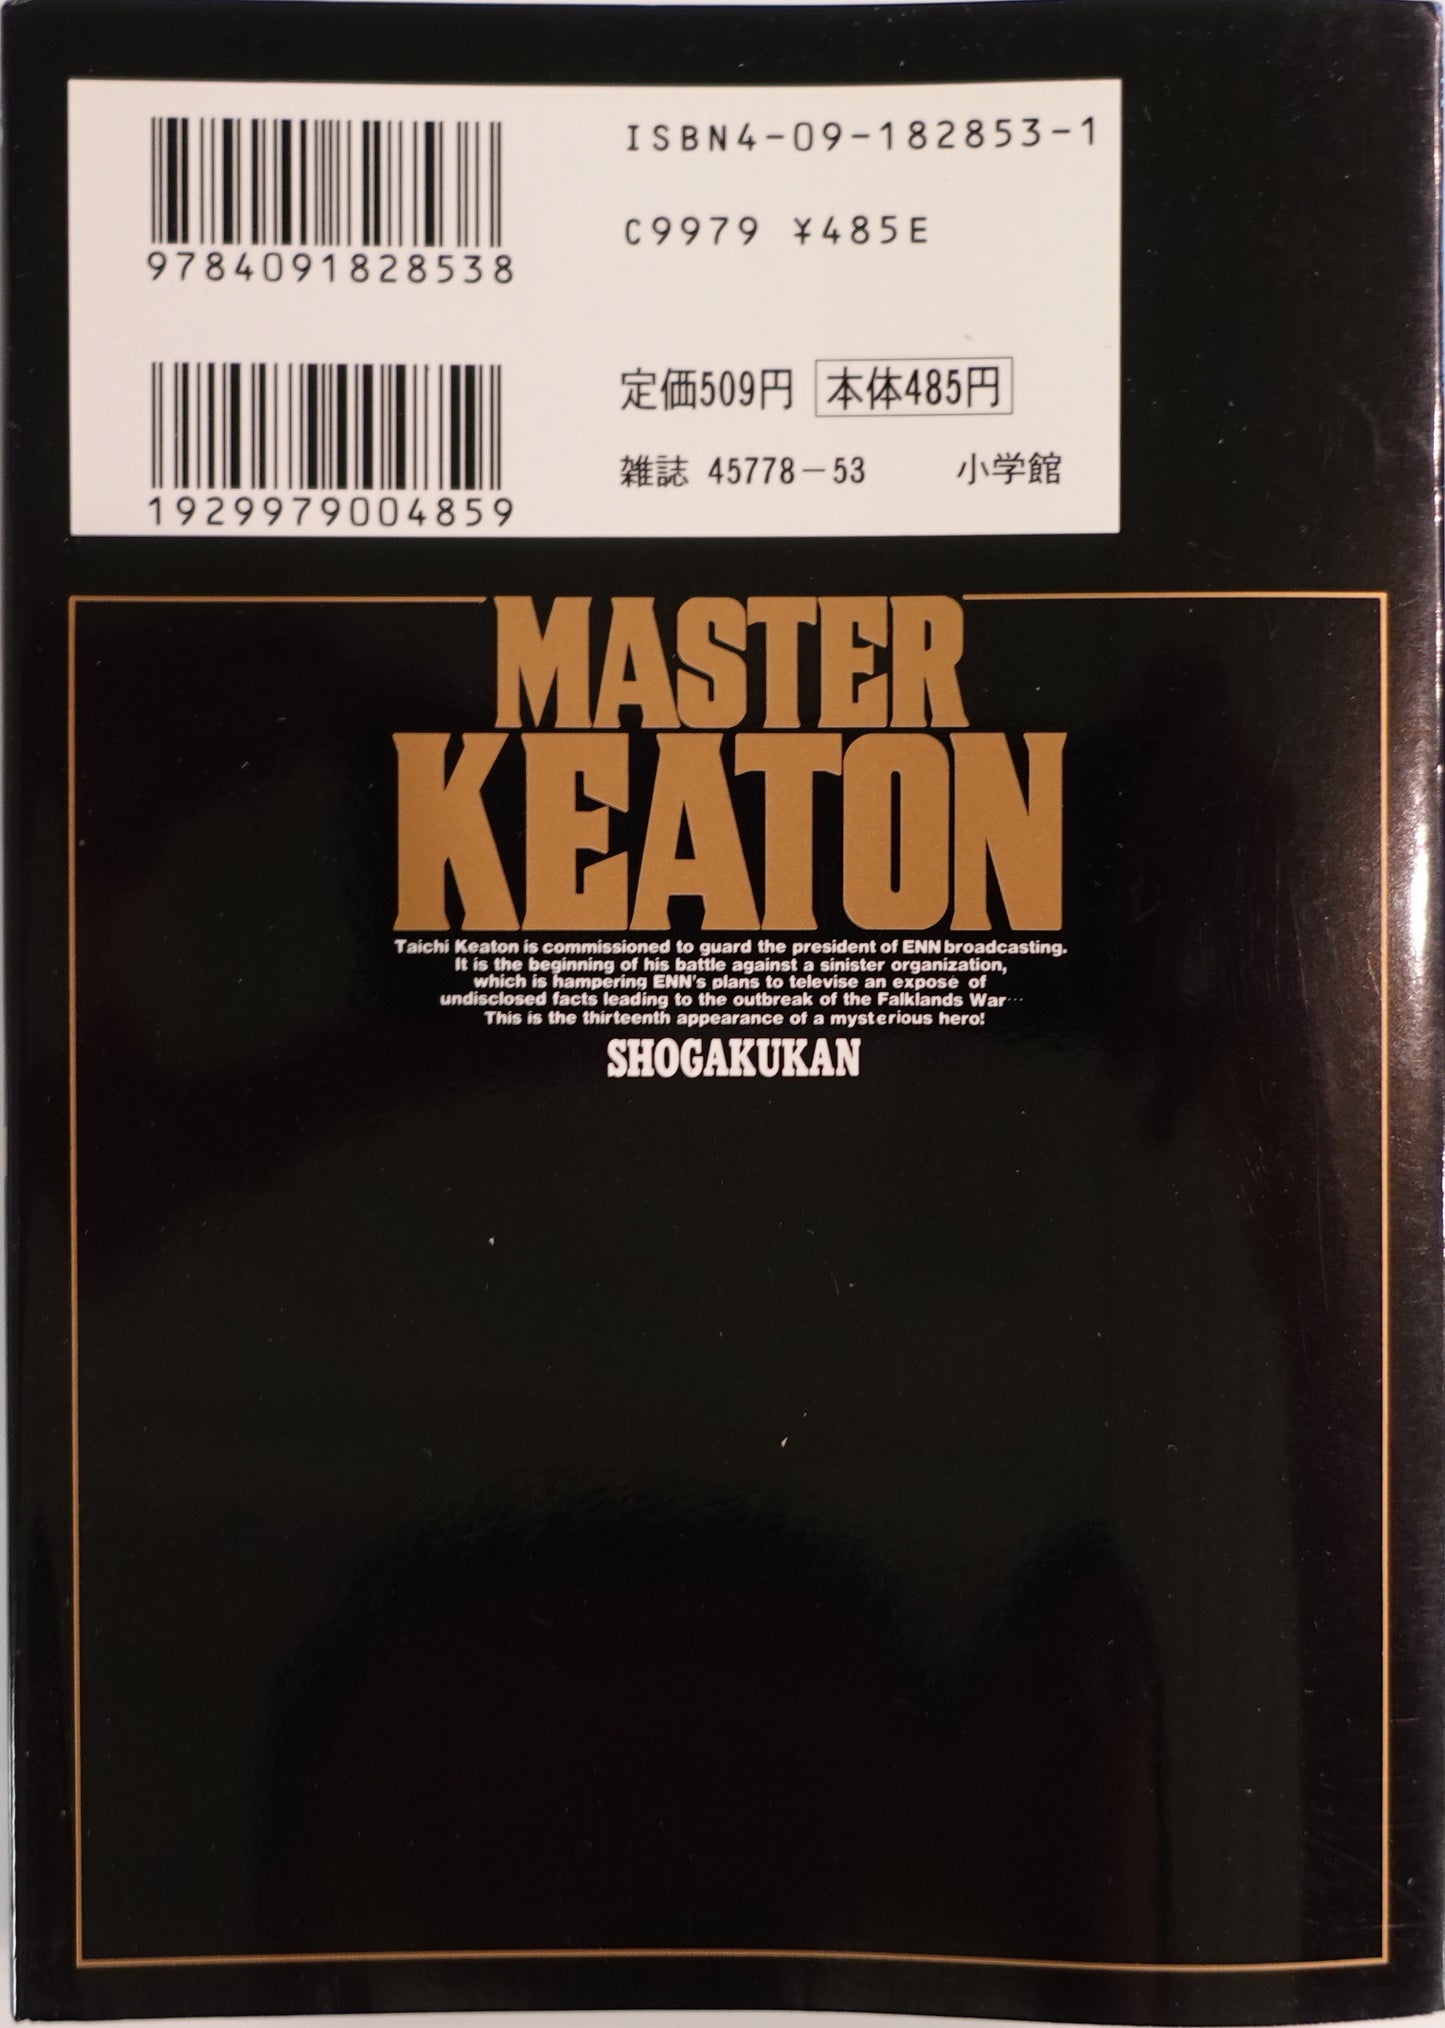 Master Keaton Vol.13-Official Japanese Edition